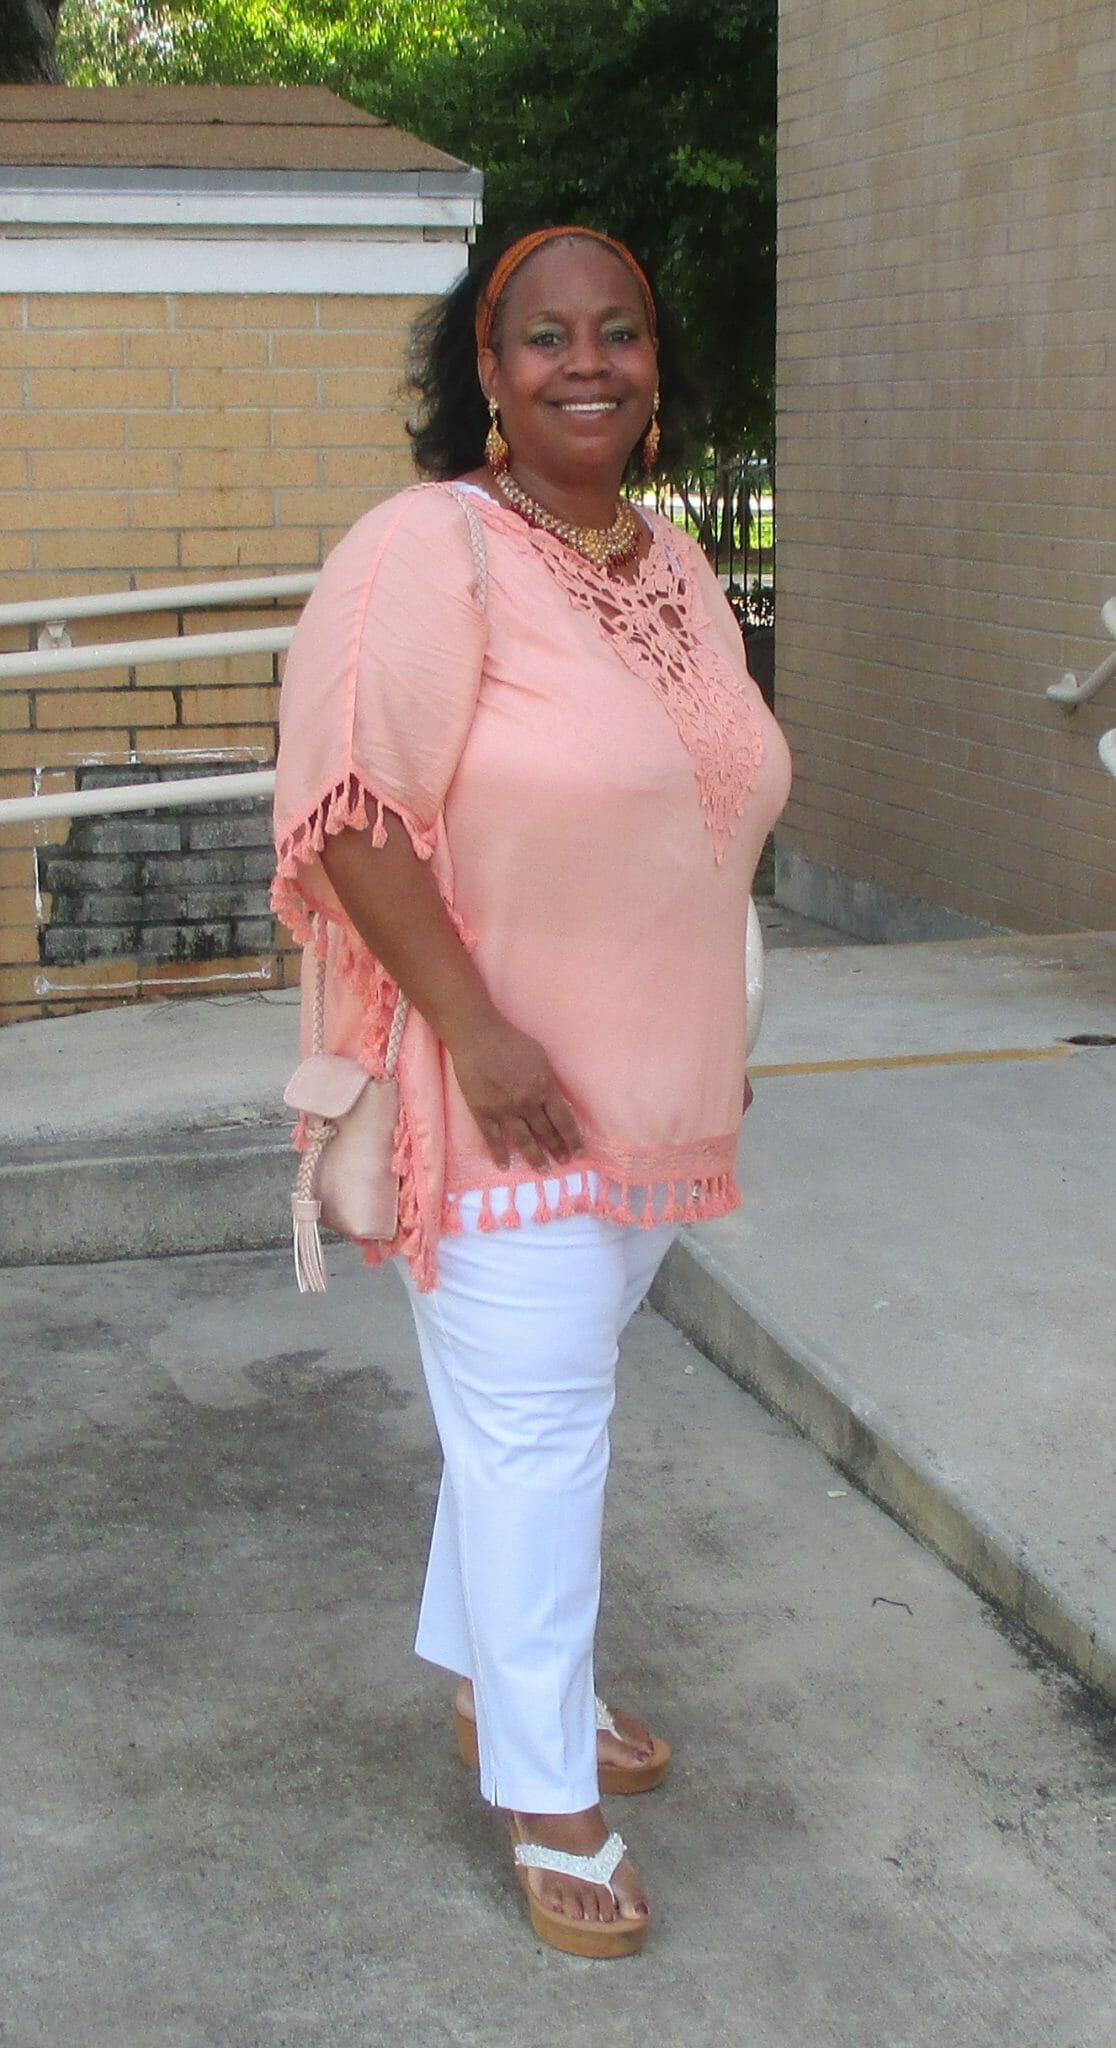 Ashro Woman of the Week, Tracey, a smiling African-American woman in a summery coral top and white slacks.